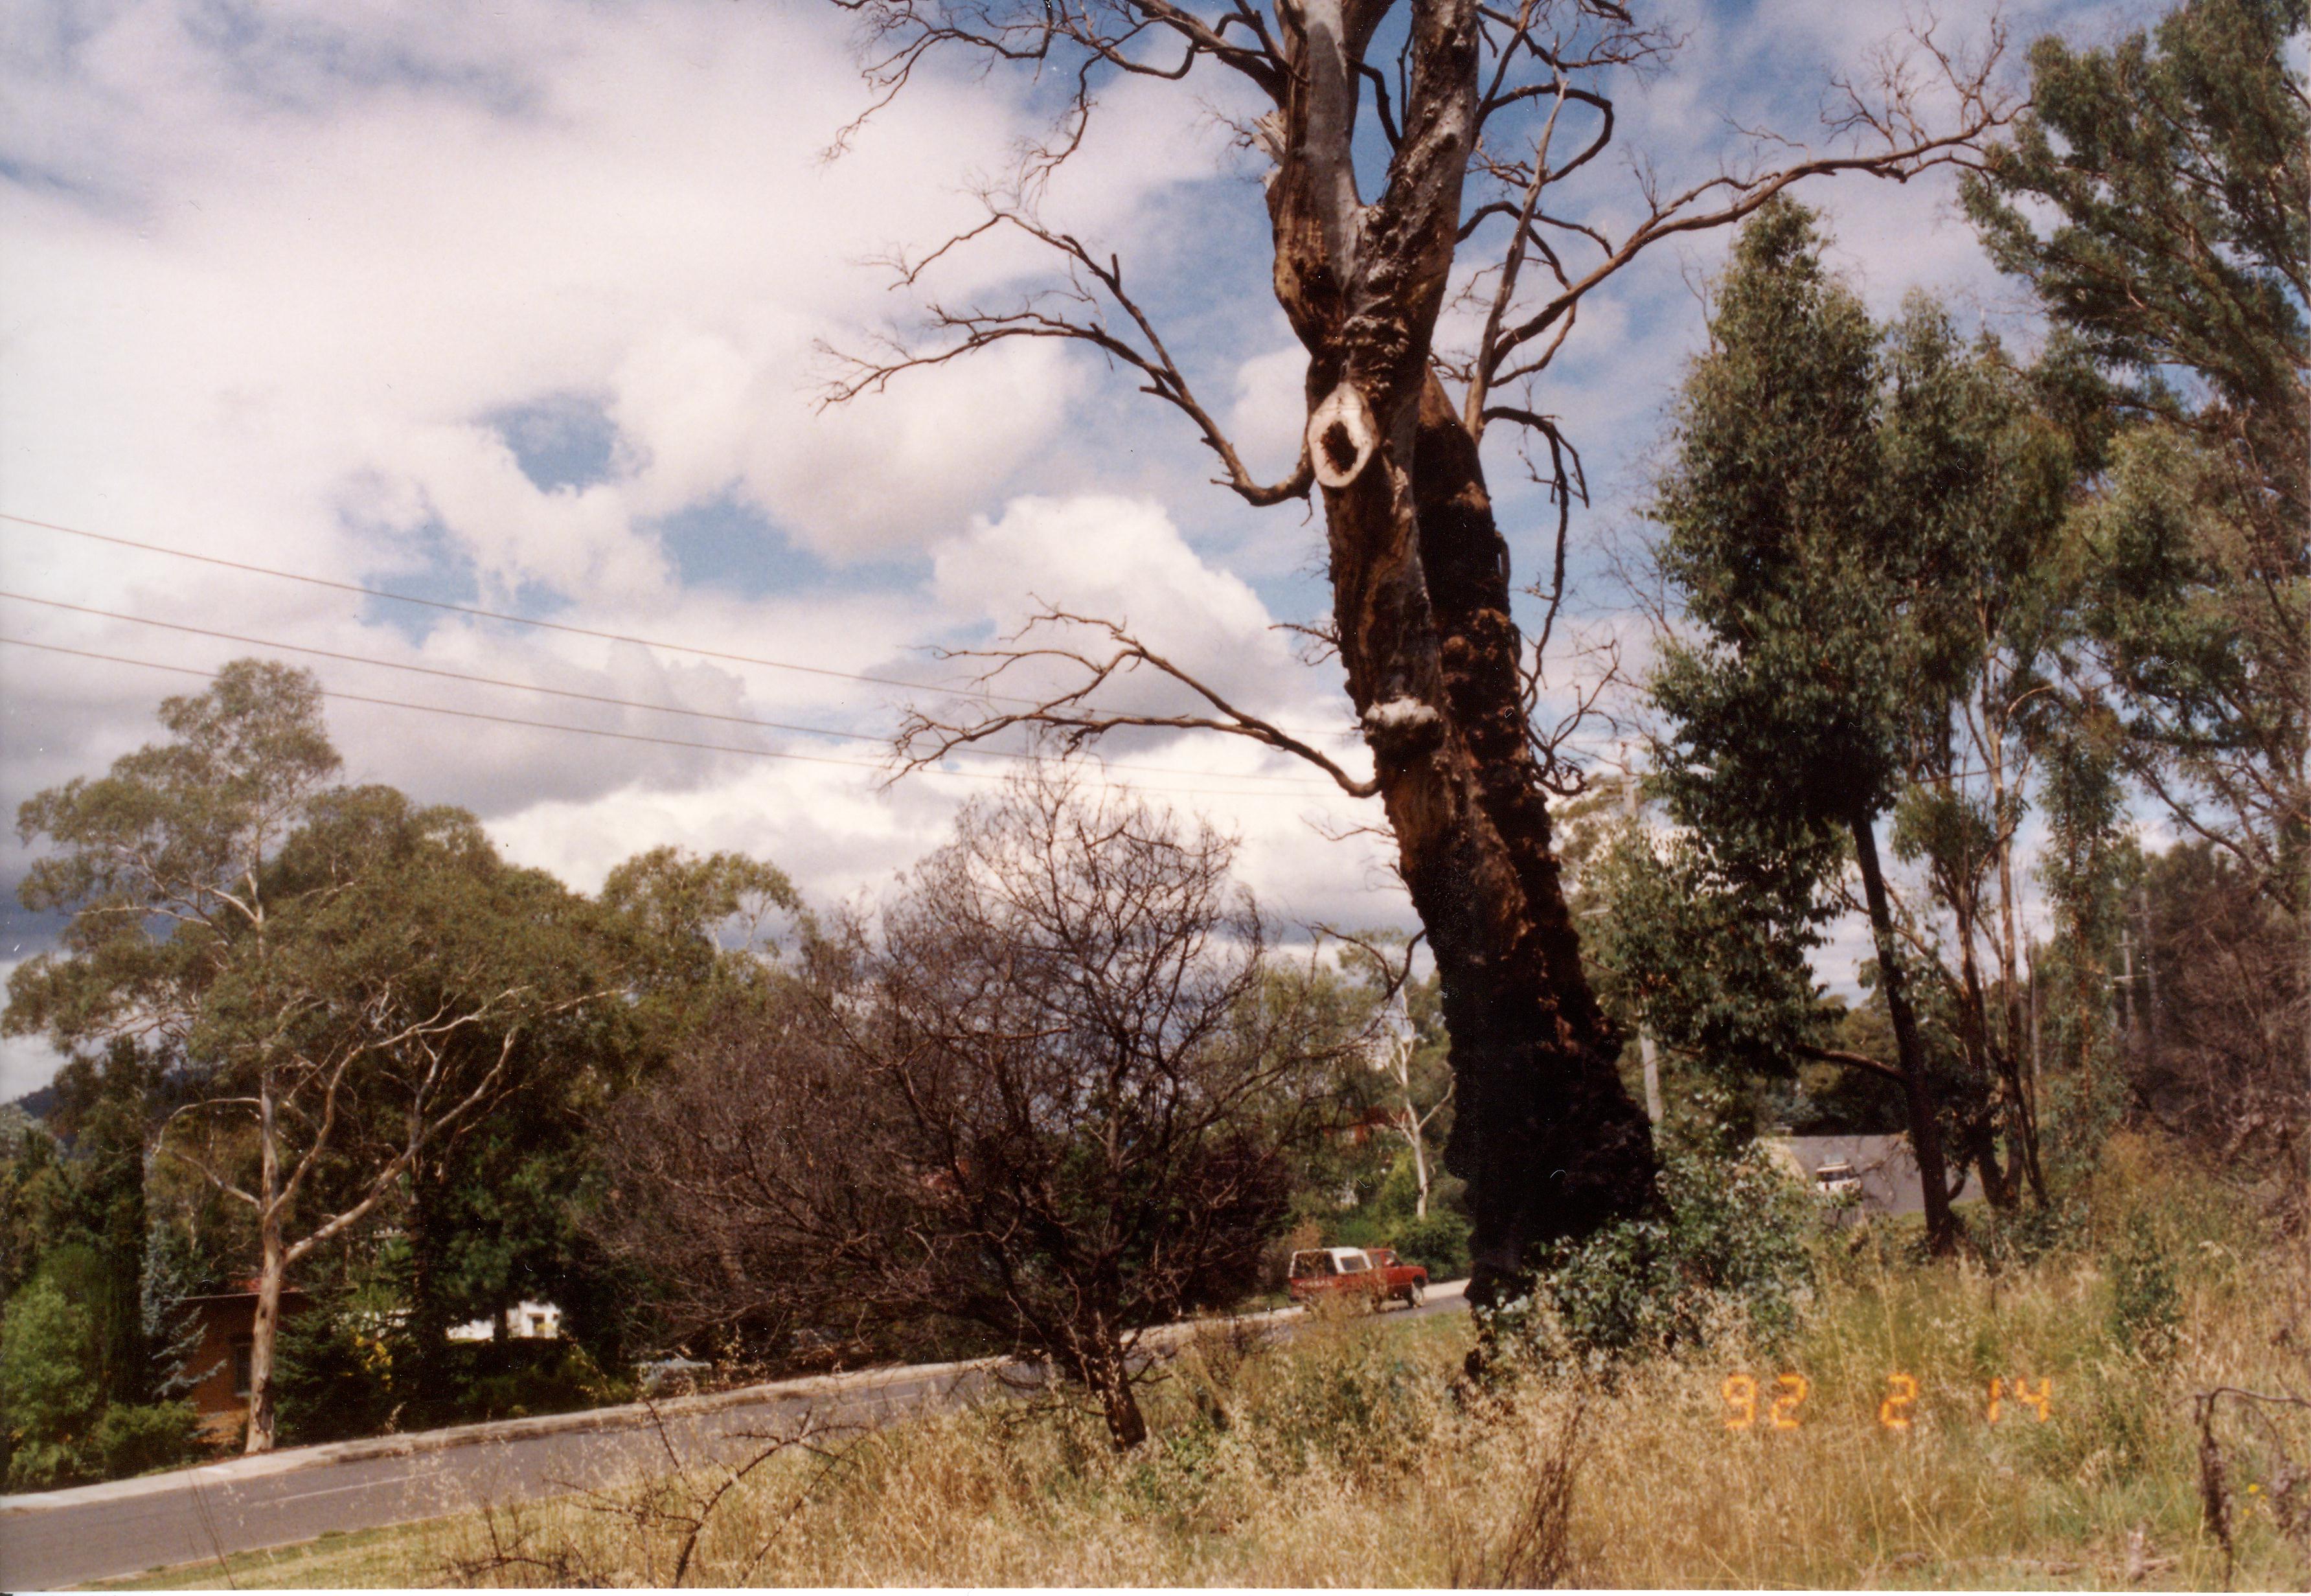 Year 1992 Site 30